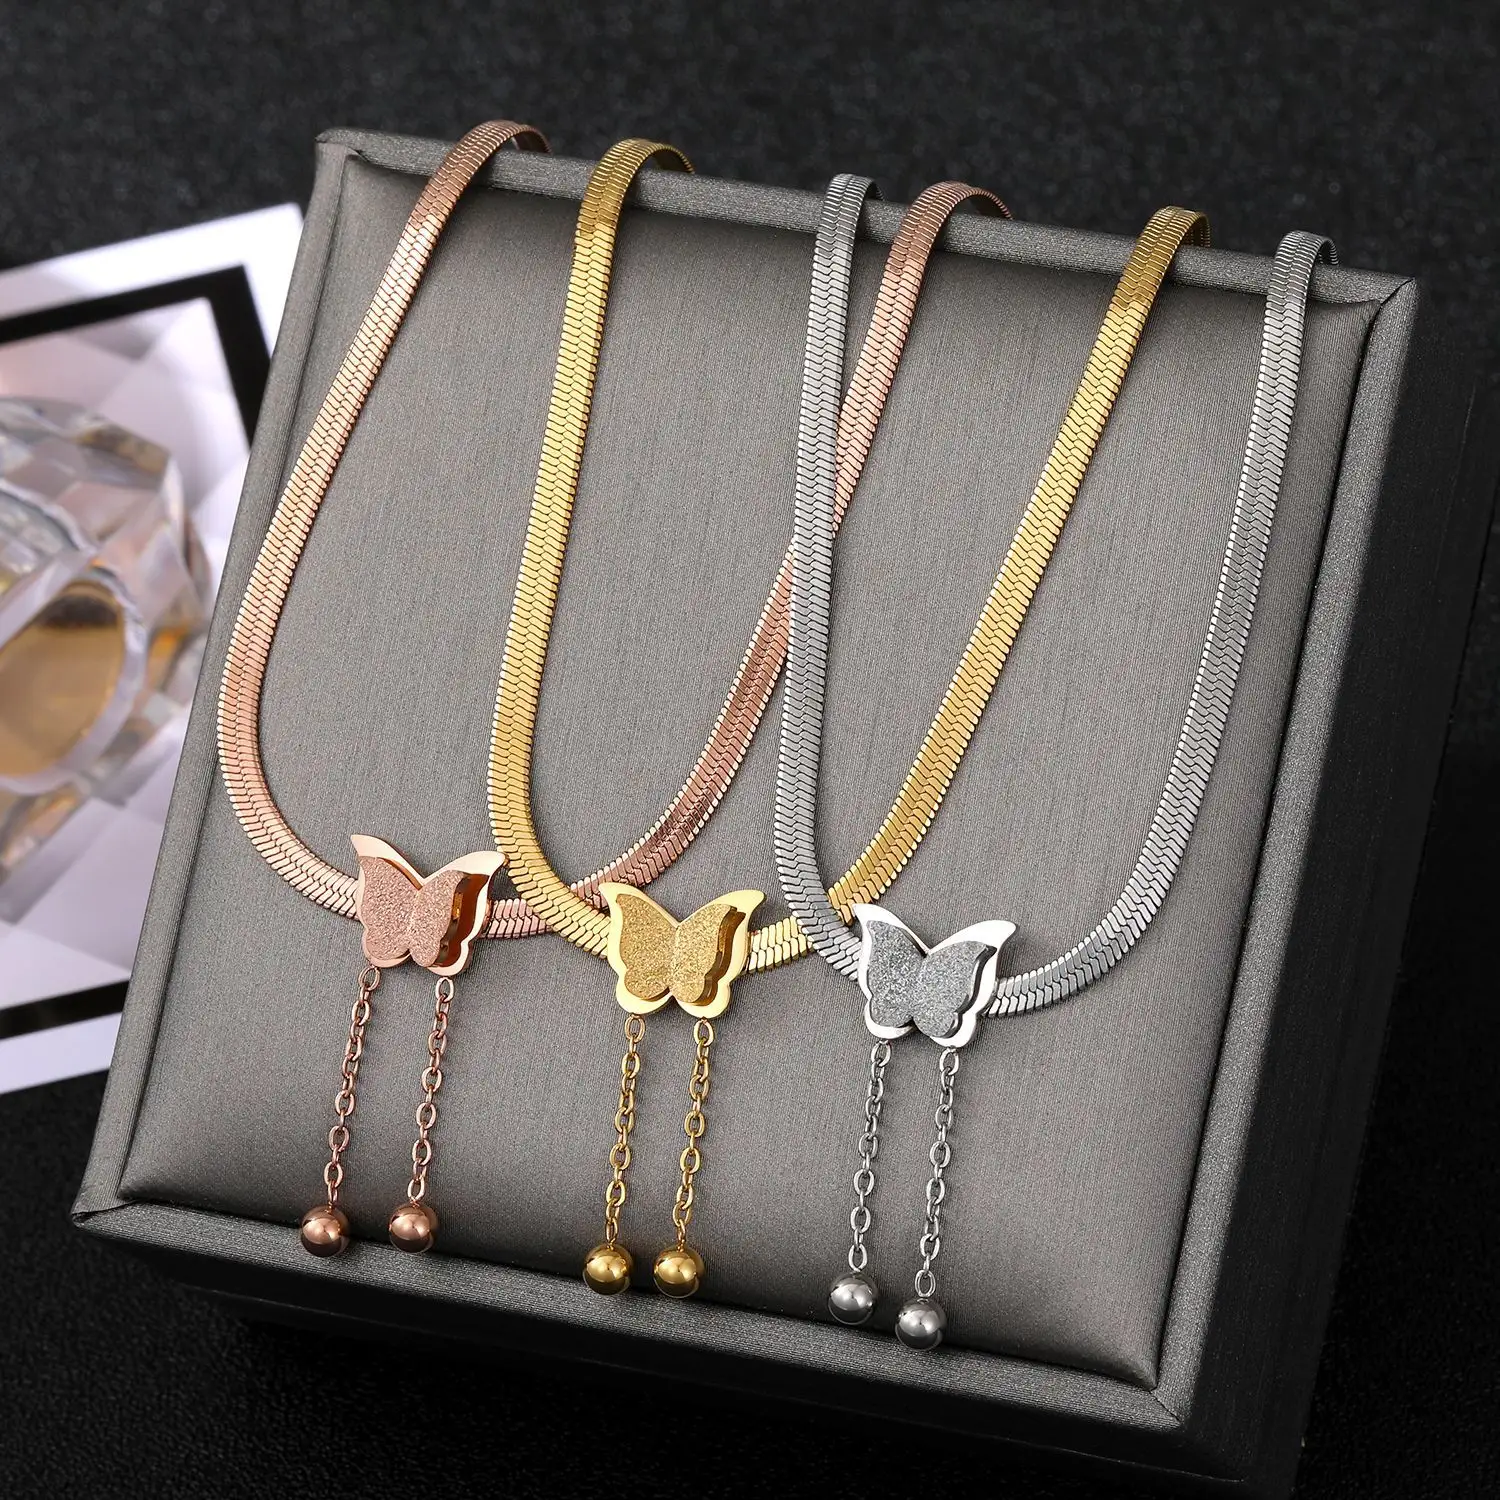 Hifive Fashion Chain 18K Gold Plated Butterfly love heart Pendant Jewelry Designs 316L Stainless Steel Necklace wholesale